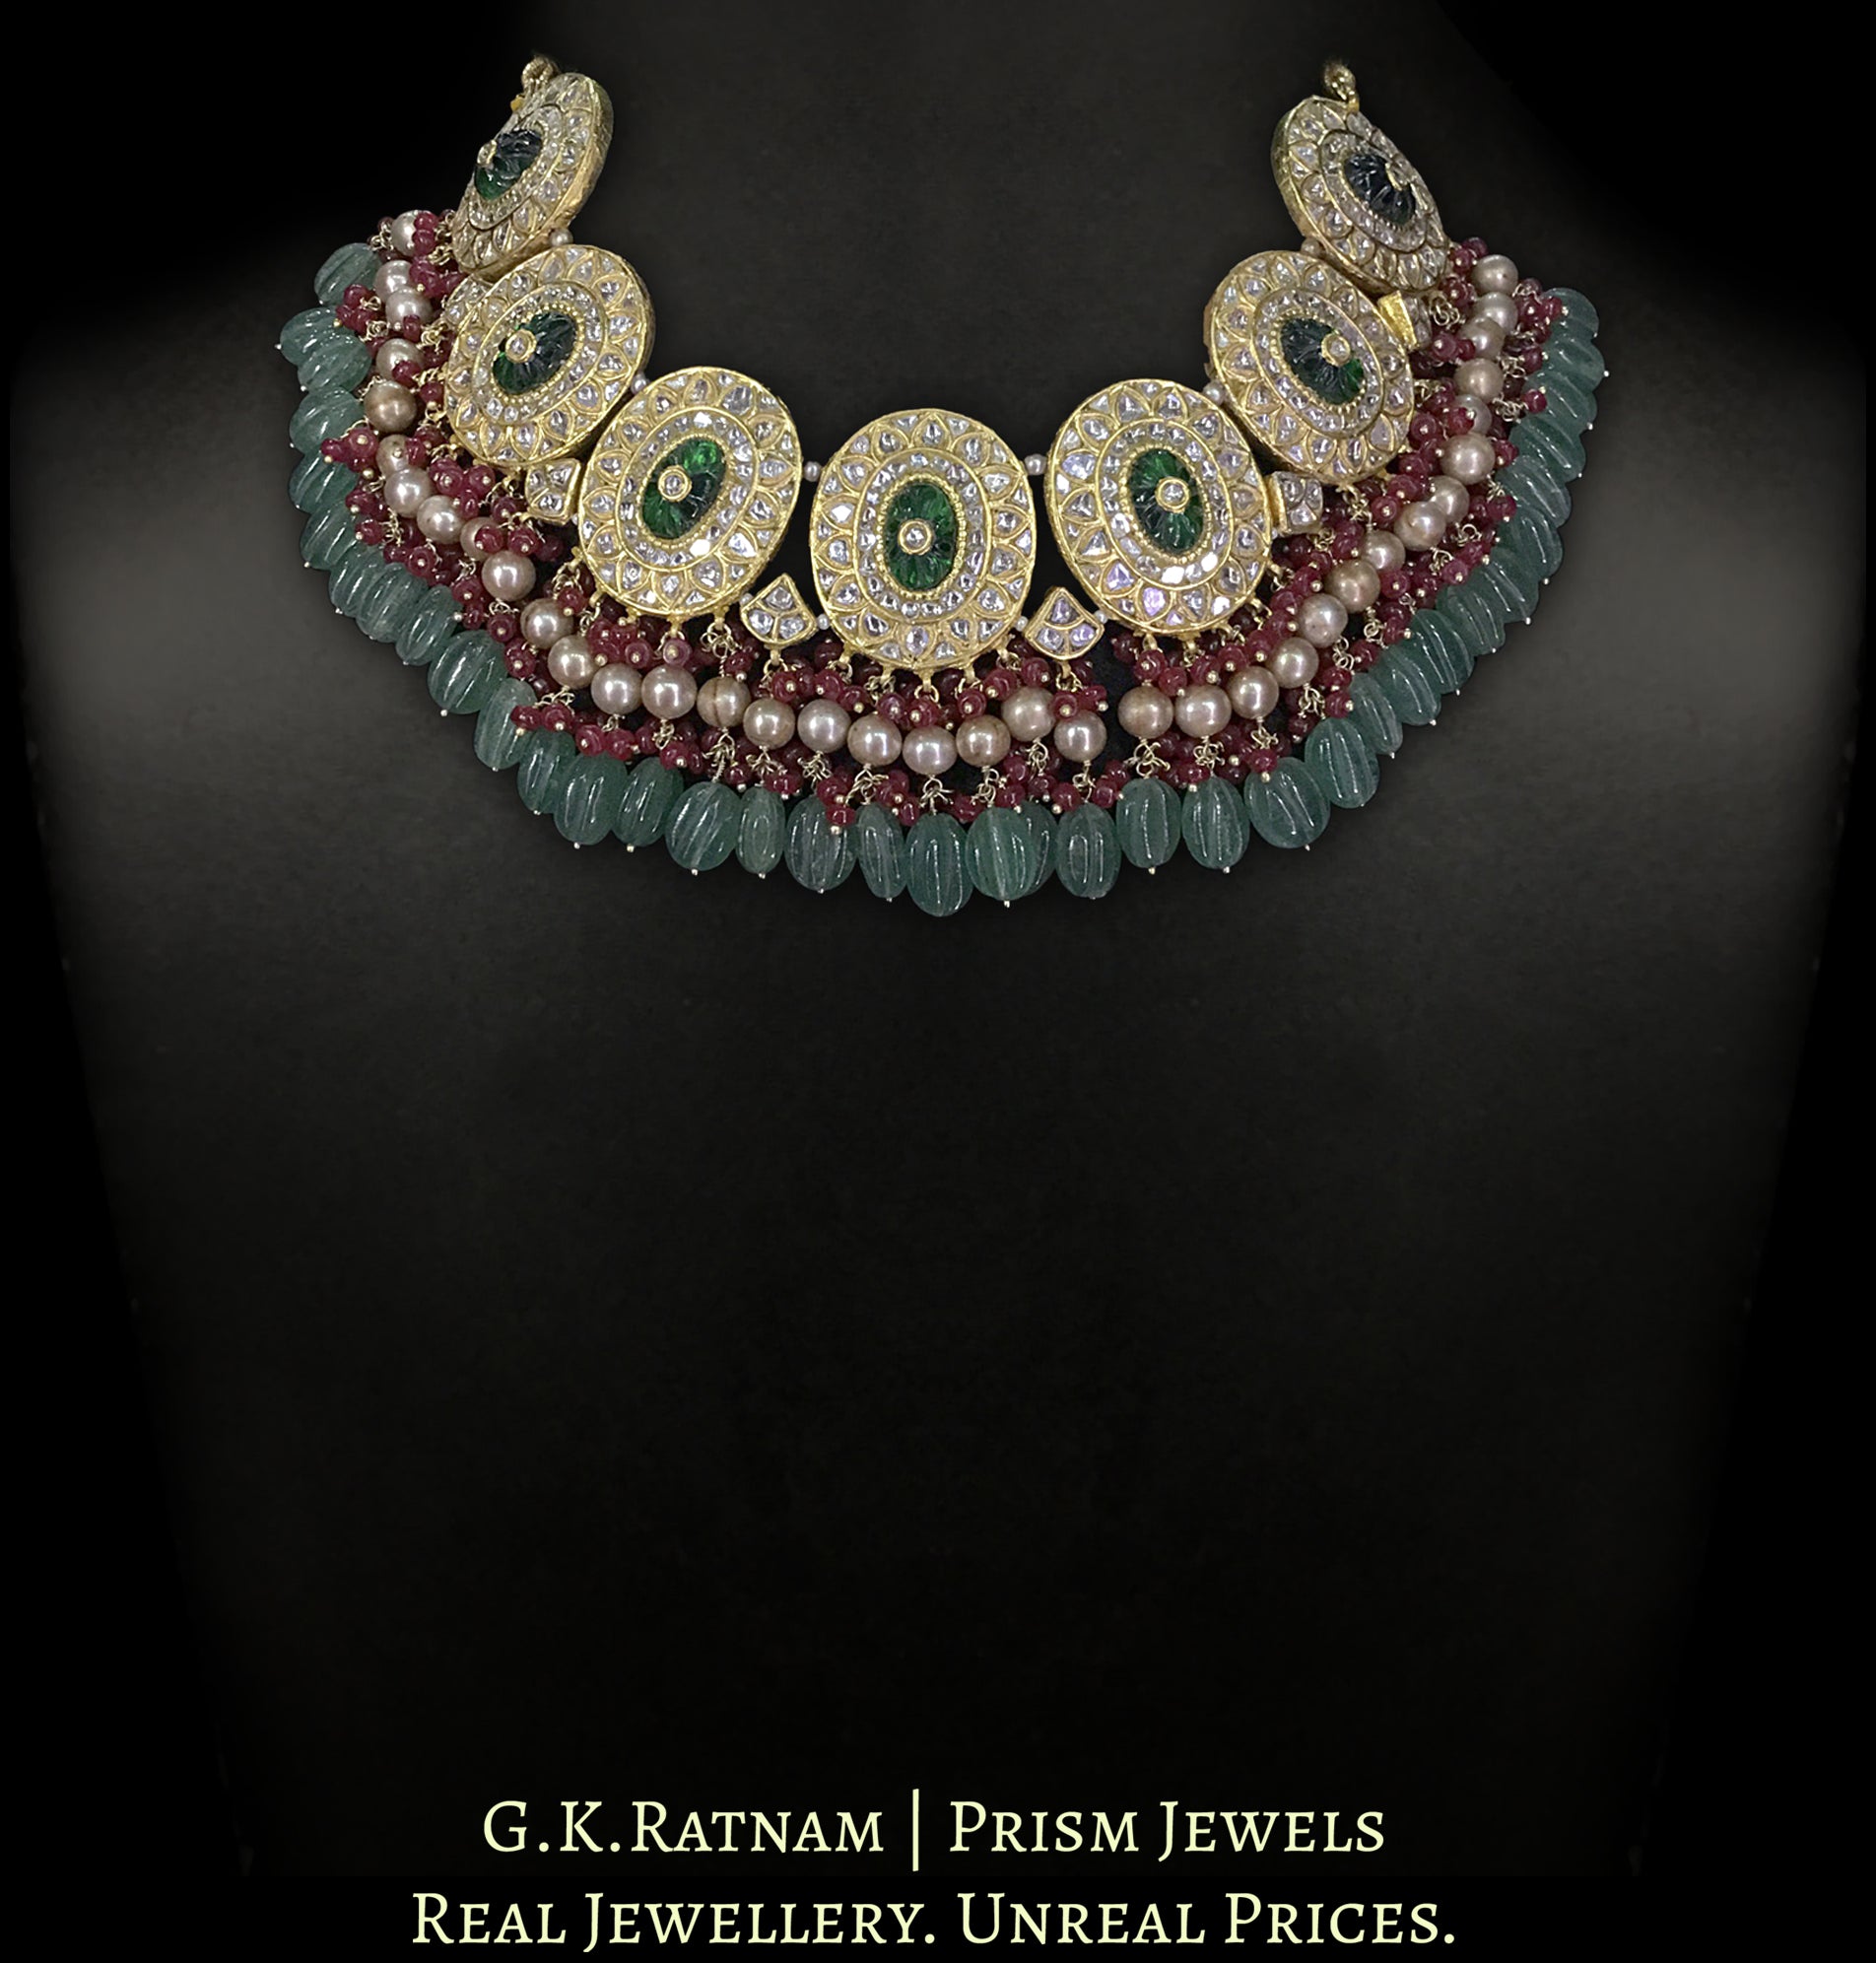 23k Gold and Diamond Polki Necklace with Antiqued Hyderabadi Pearls, Rubies and Green Strawberry Quartz